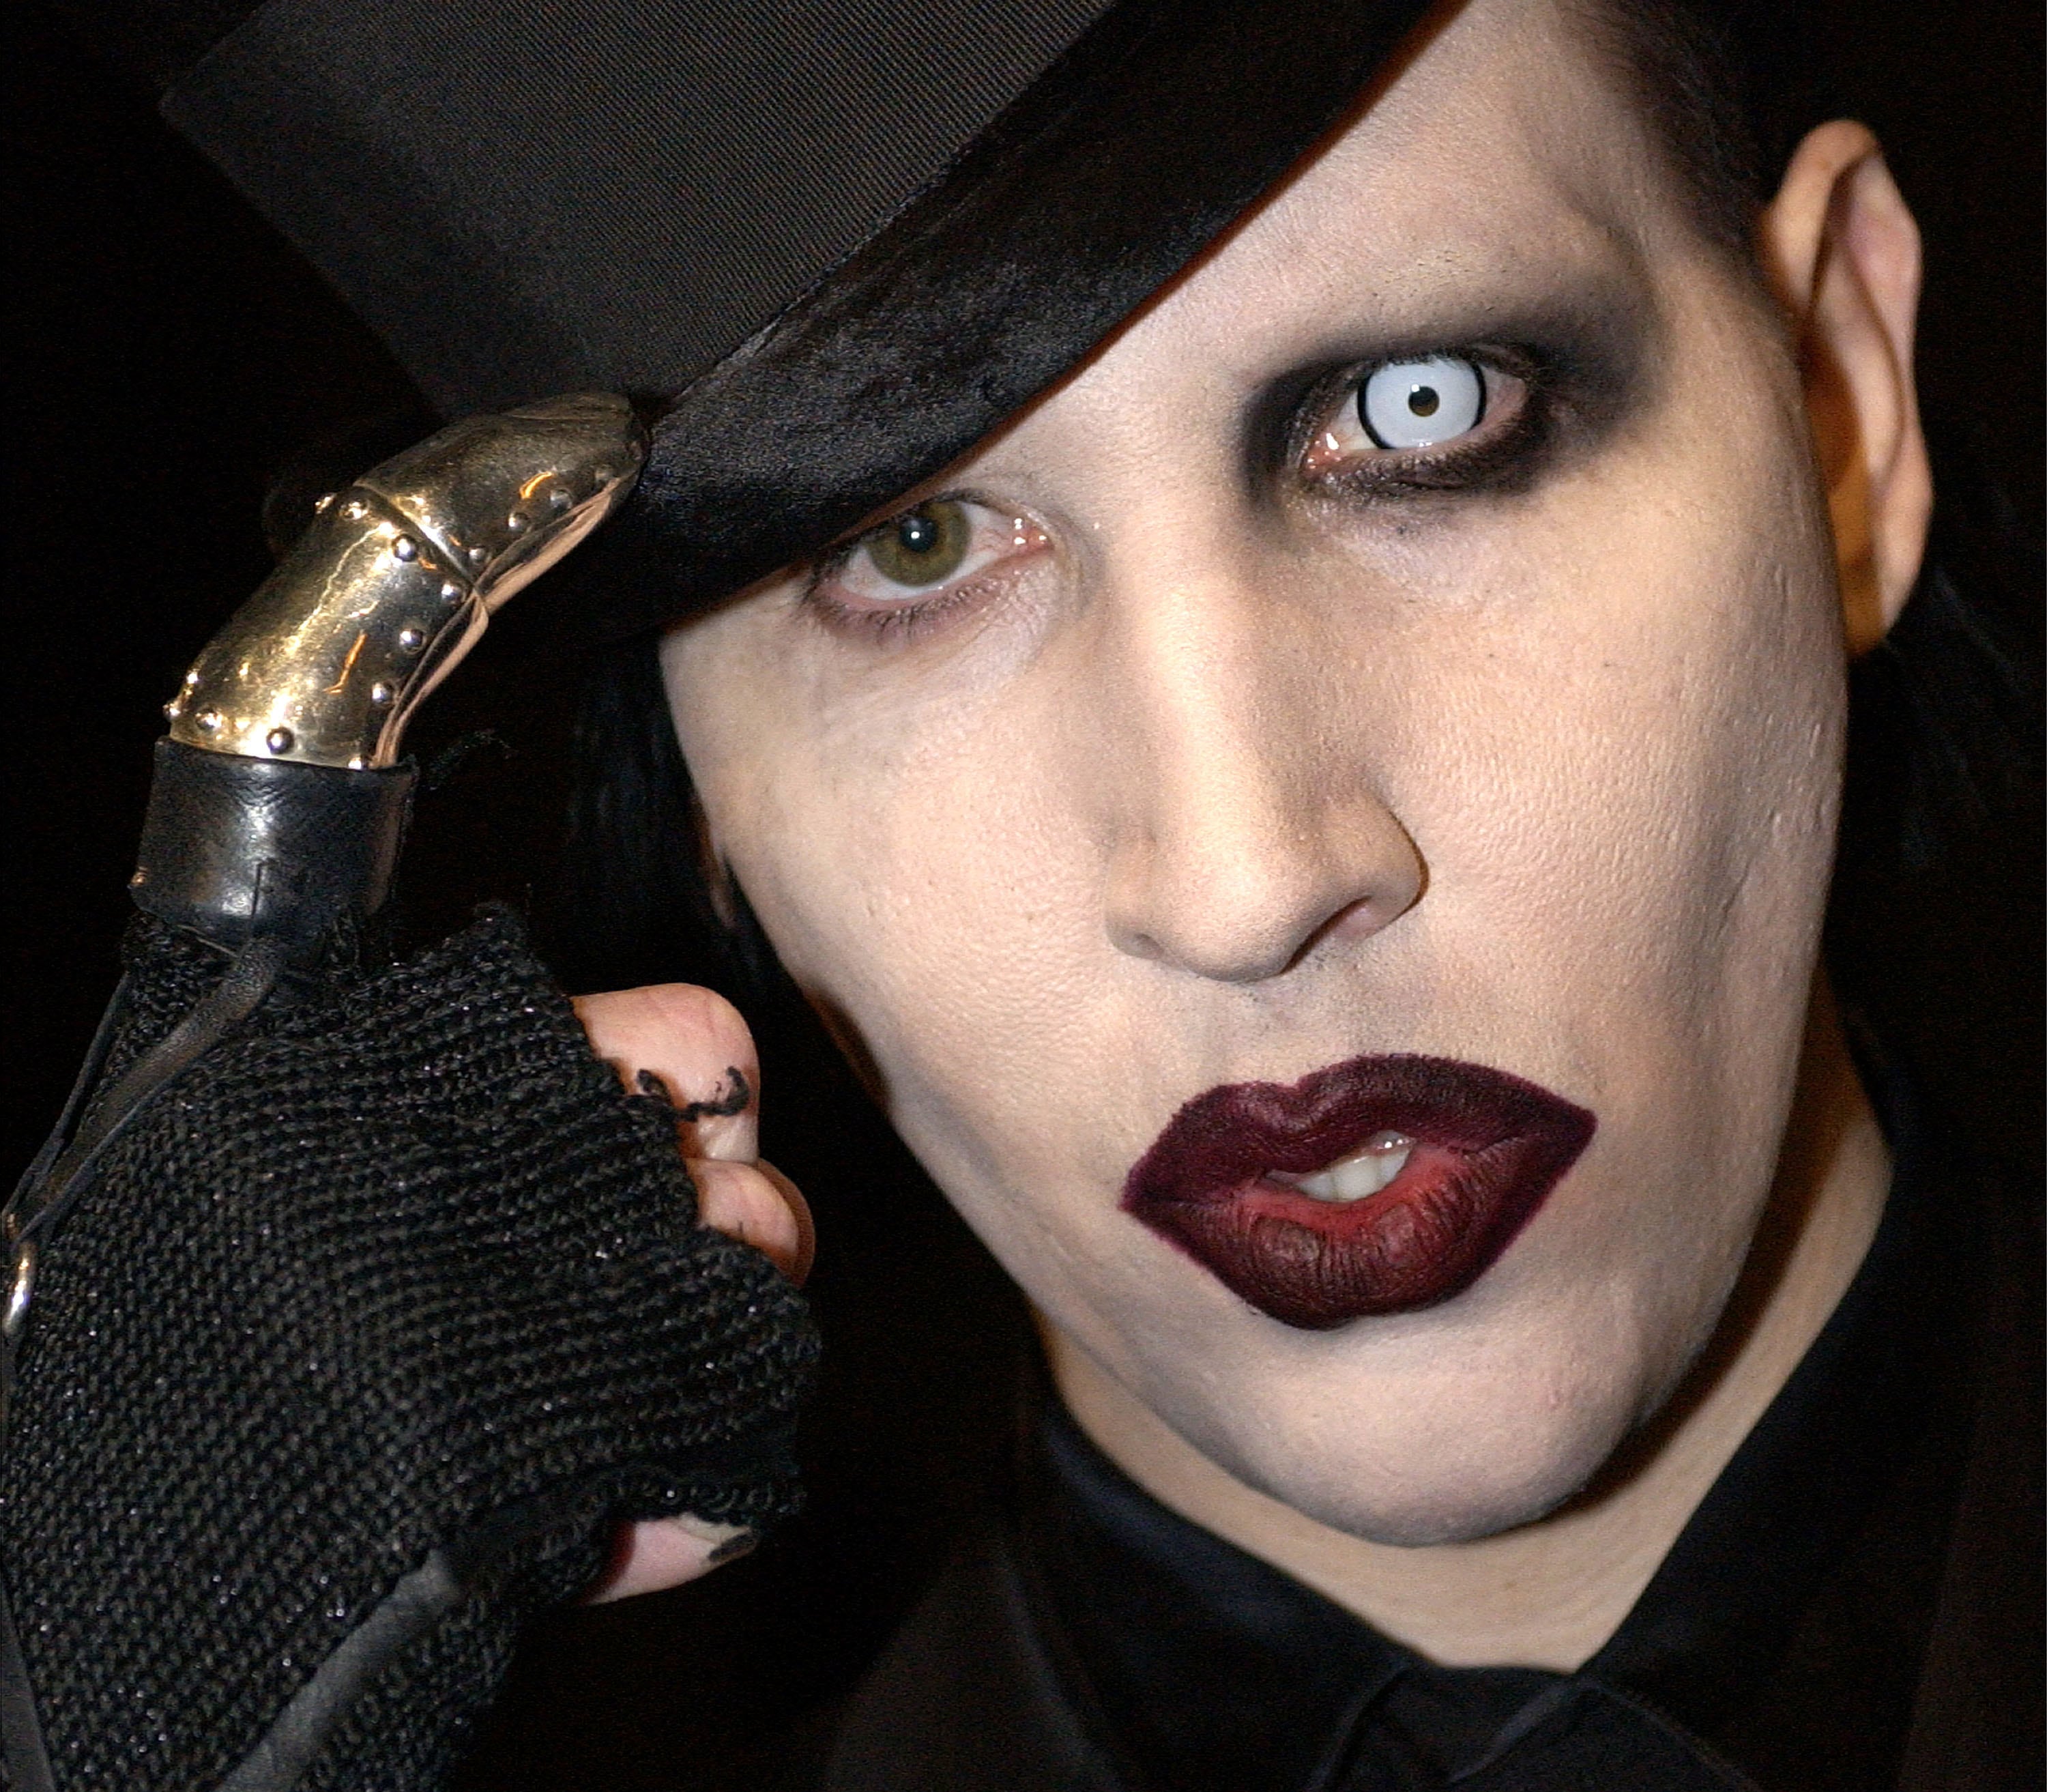 Manson with contacts